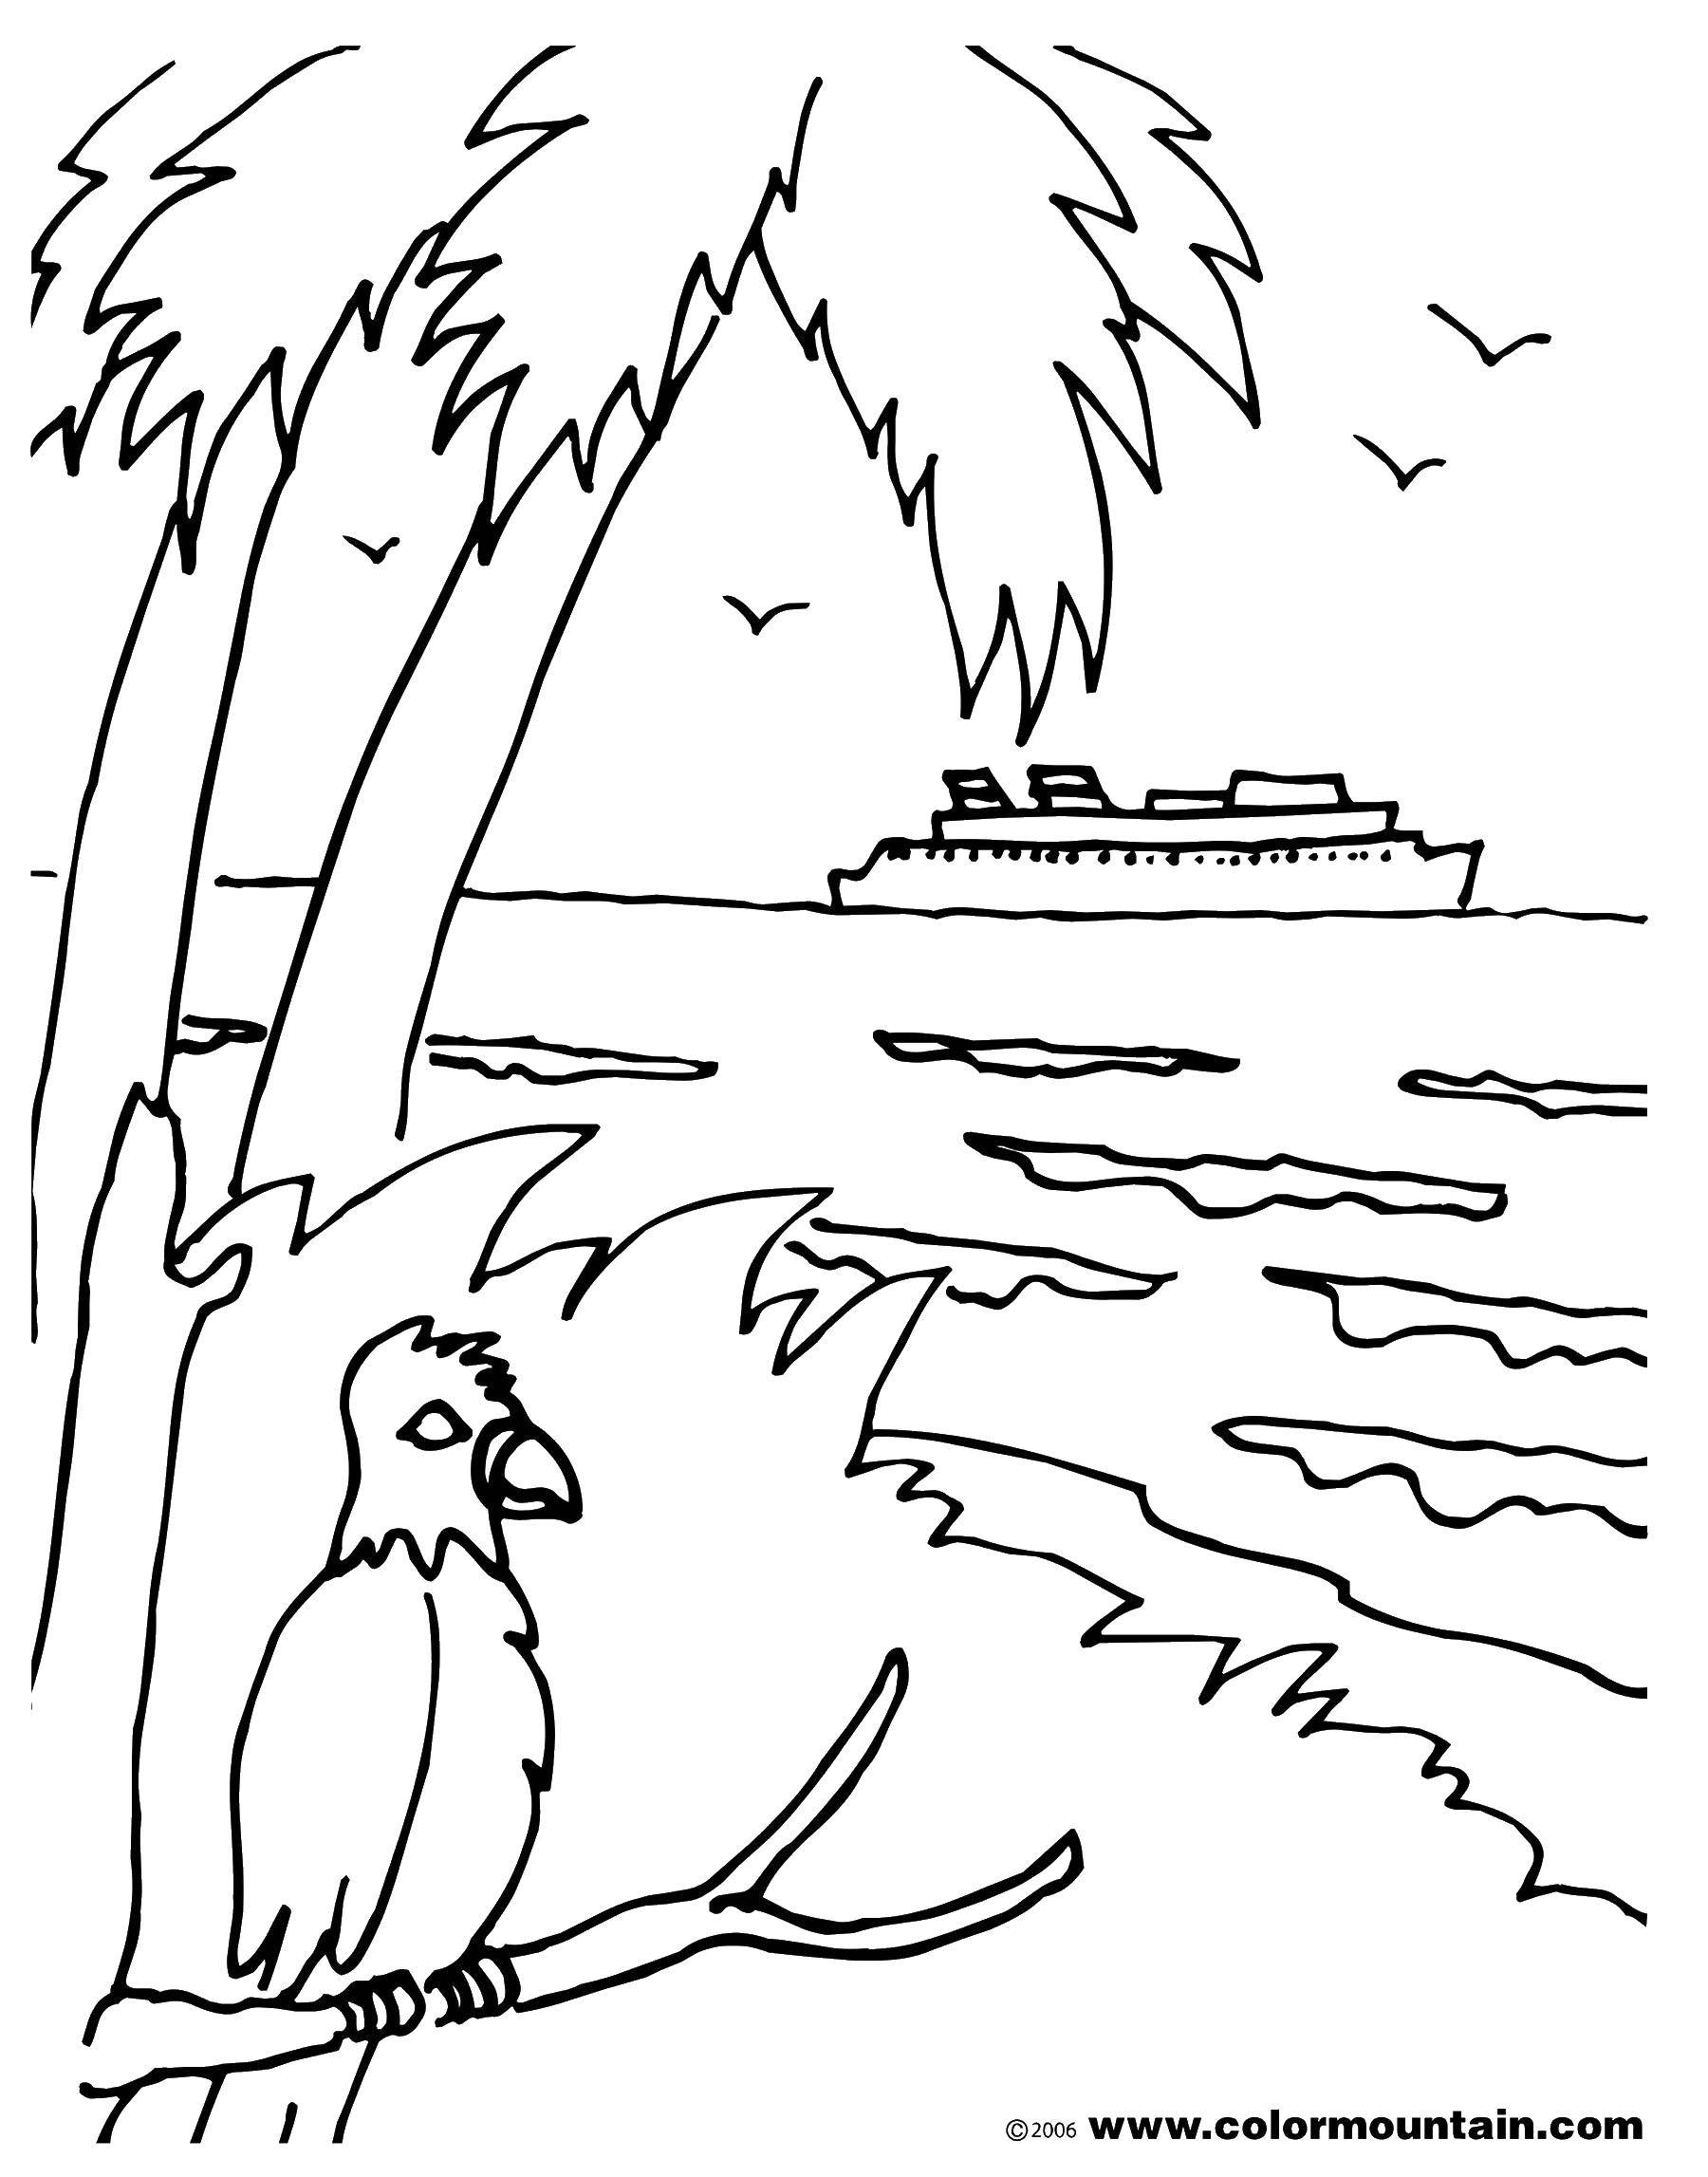 Coloring Parrot watching boat. Category island. Tags:  Birds, parrot.